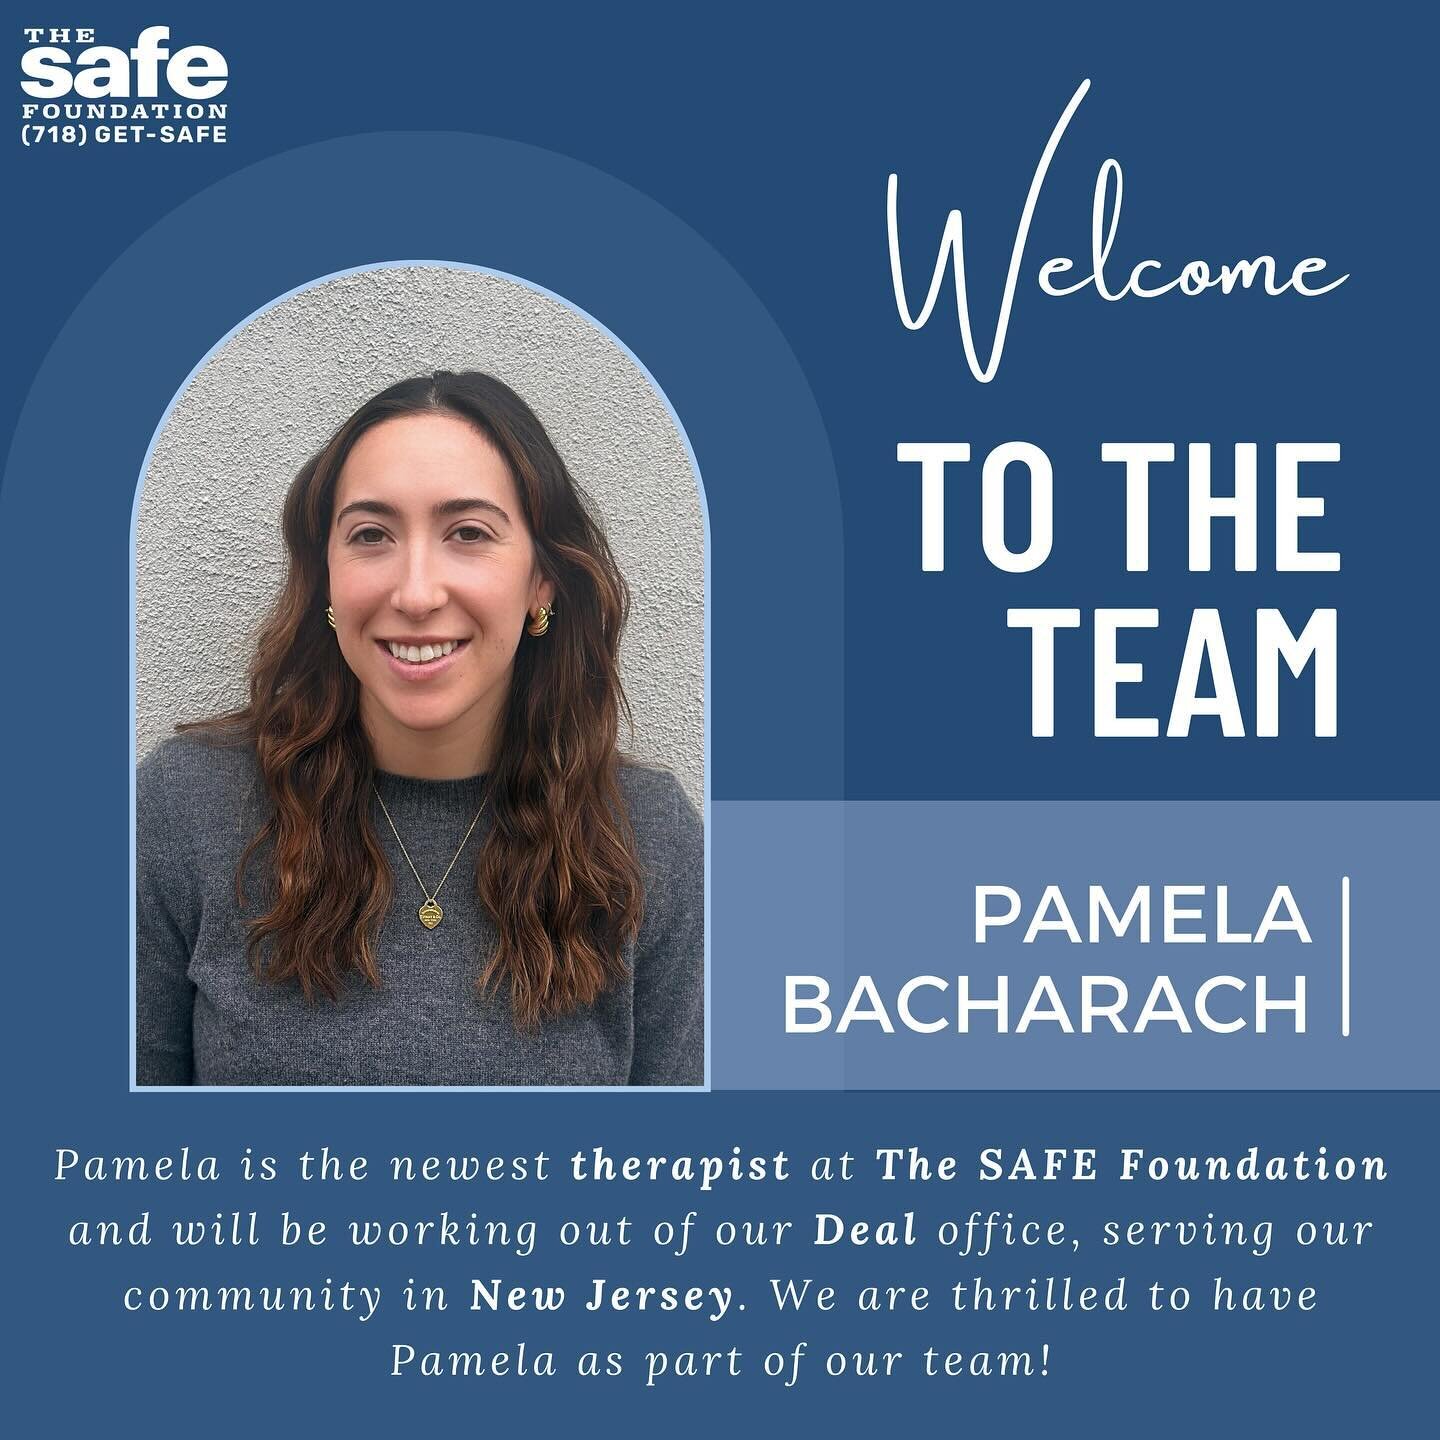 We are so excited to have Pamela as part of our team in Deal! Give Pamela a warm welcome in the comments below!

#addiction #addictionrecovery #addictiontherapist #problemgambling #gamblingaddiction #substanceusedisorder #substanceabuse  #sober #sobr